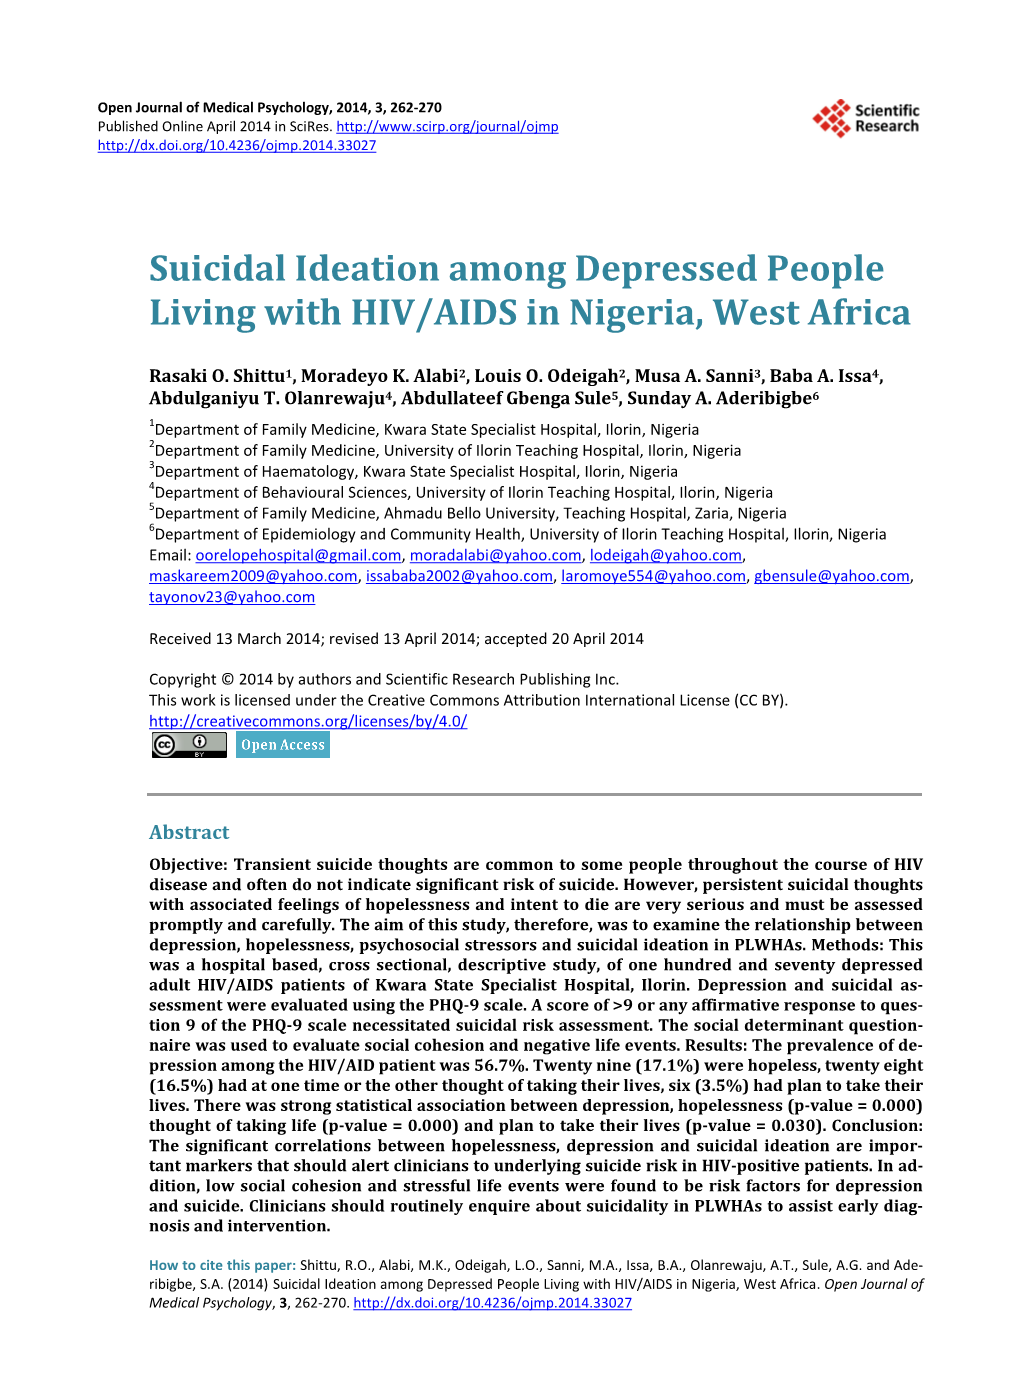 Suicidal Ideation Among Depressed People Living with HIV/AIDS in Nigeria, West Africa